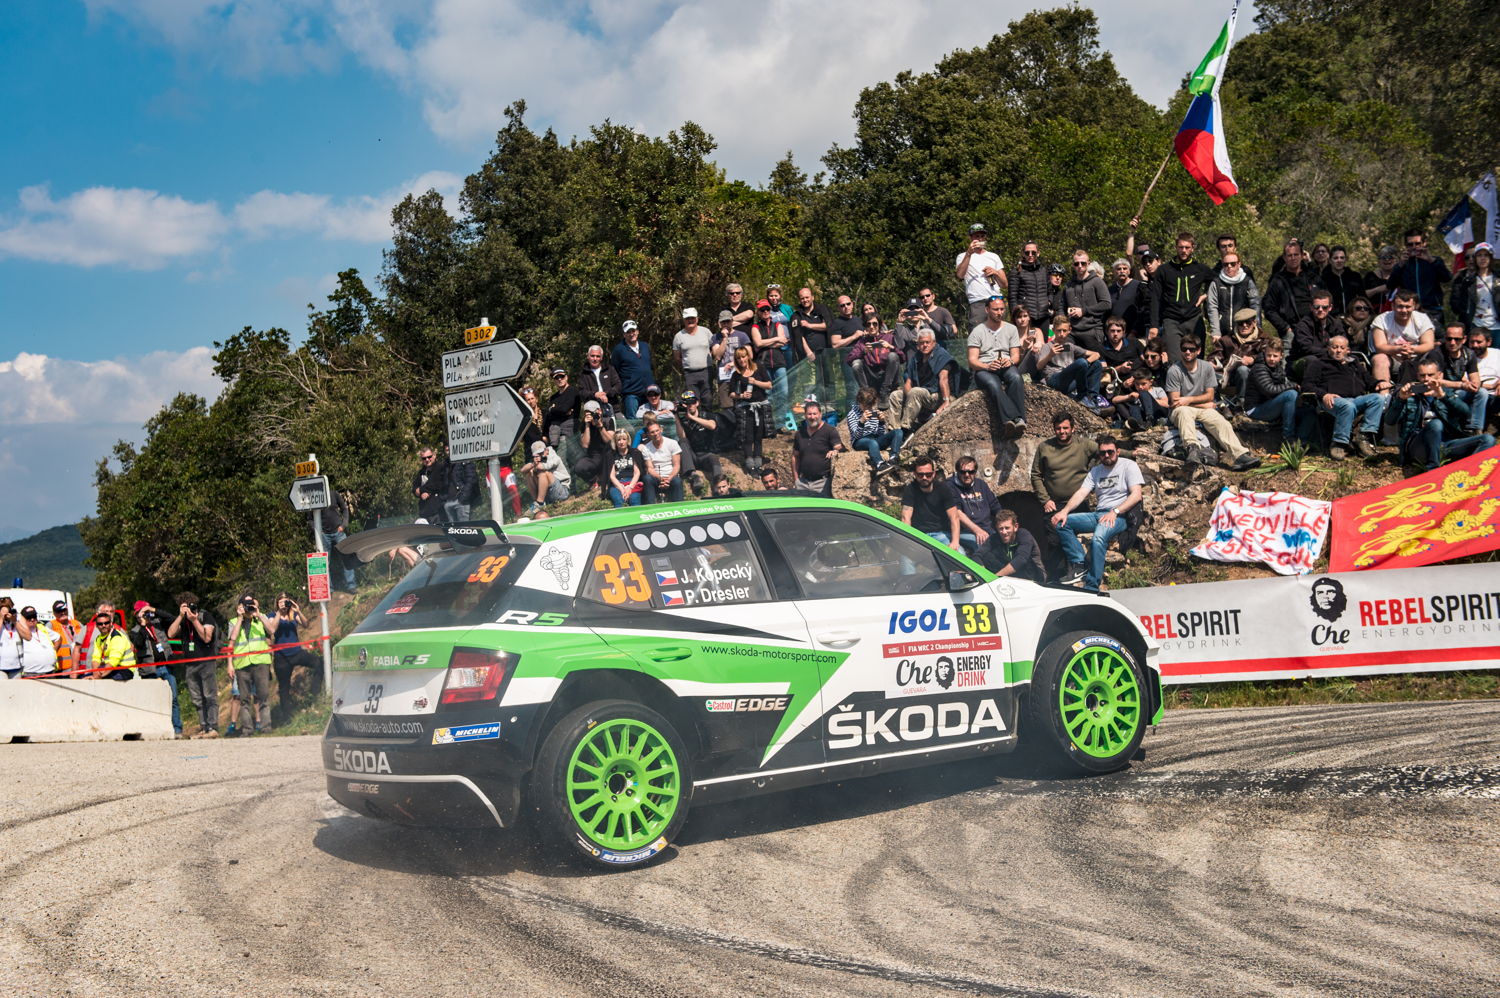 Storming into seventh place in the WRC 2 category at the Tour de Corse – Jan Kopecký/Pavel Dresler (CZE/CZE) in the ŠKODA FABIA R5.